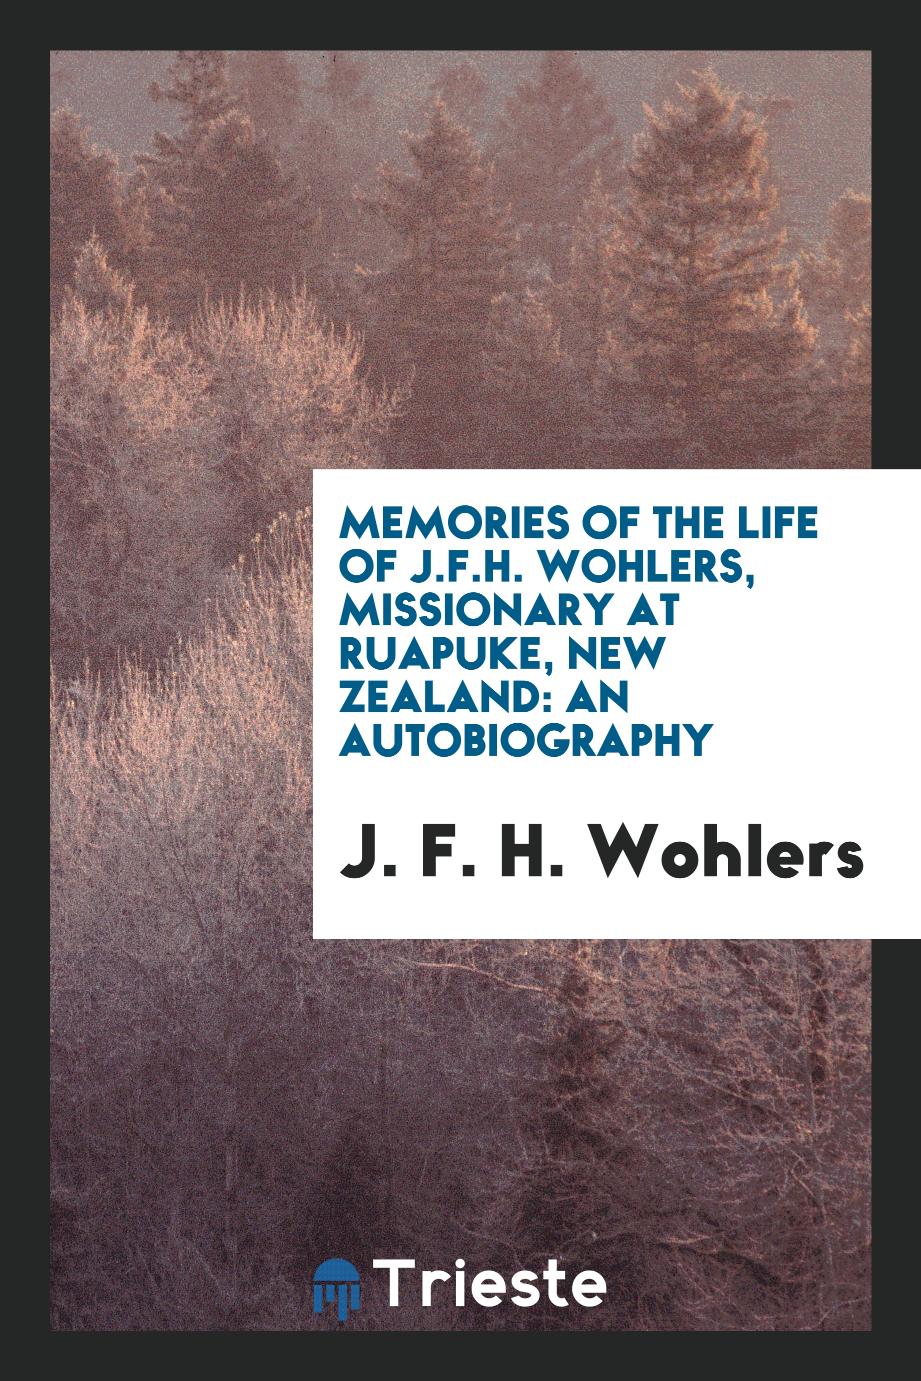 Memories of the life of J.F.H. Wohlers, missionary at Ruapuke, New Zealand: an autobiography